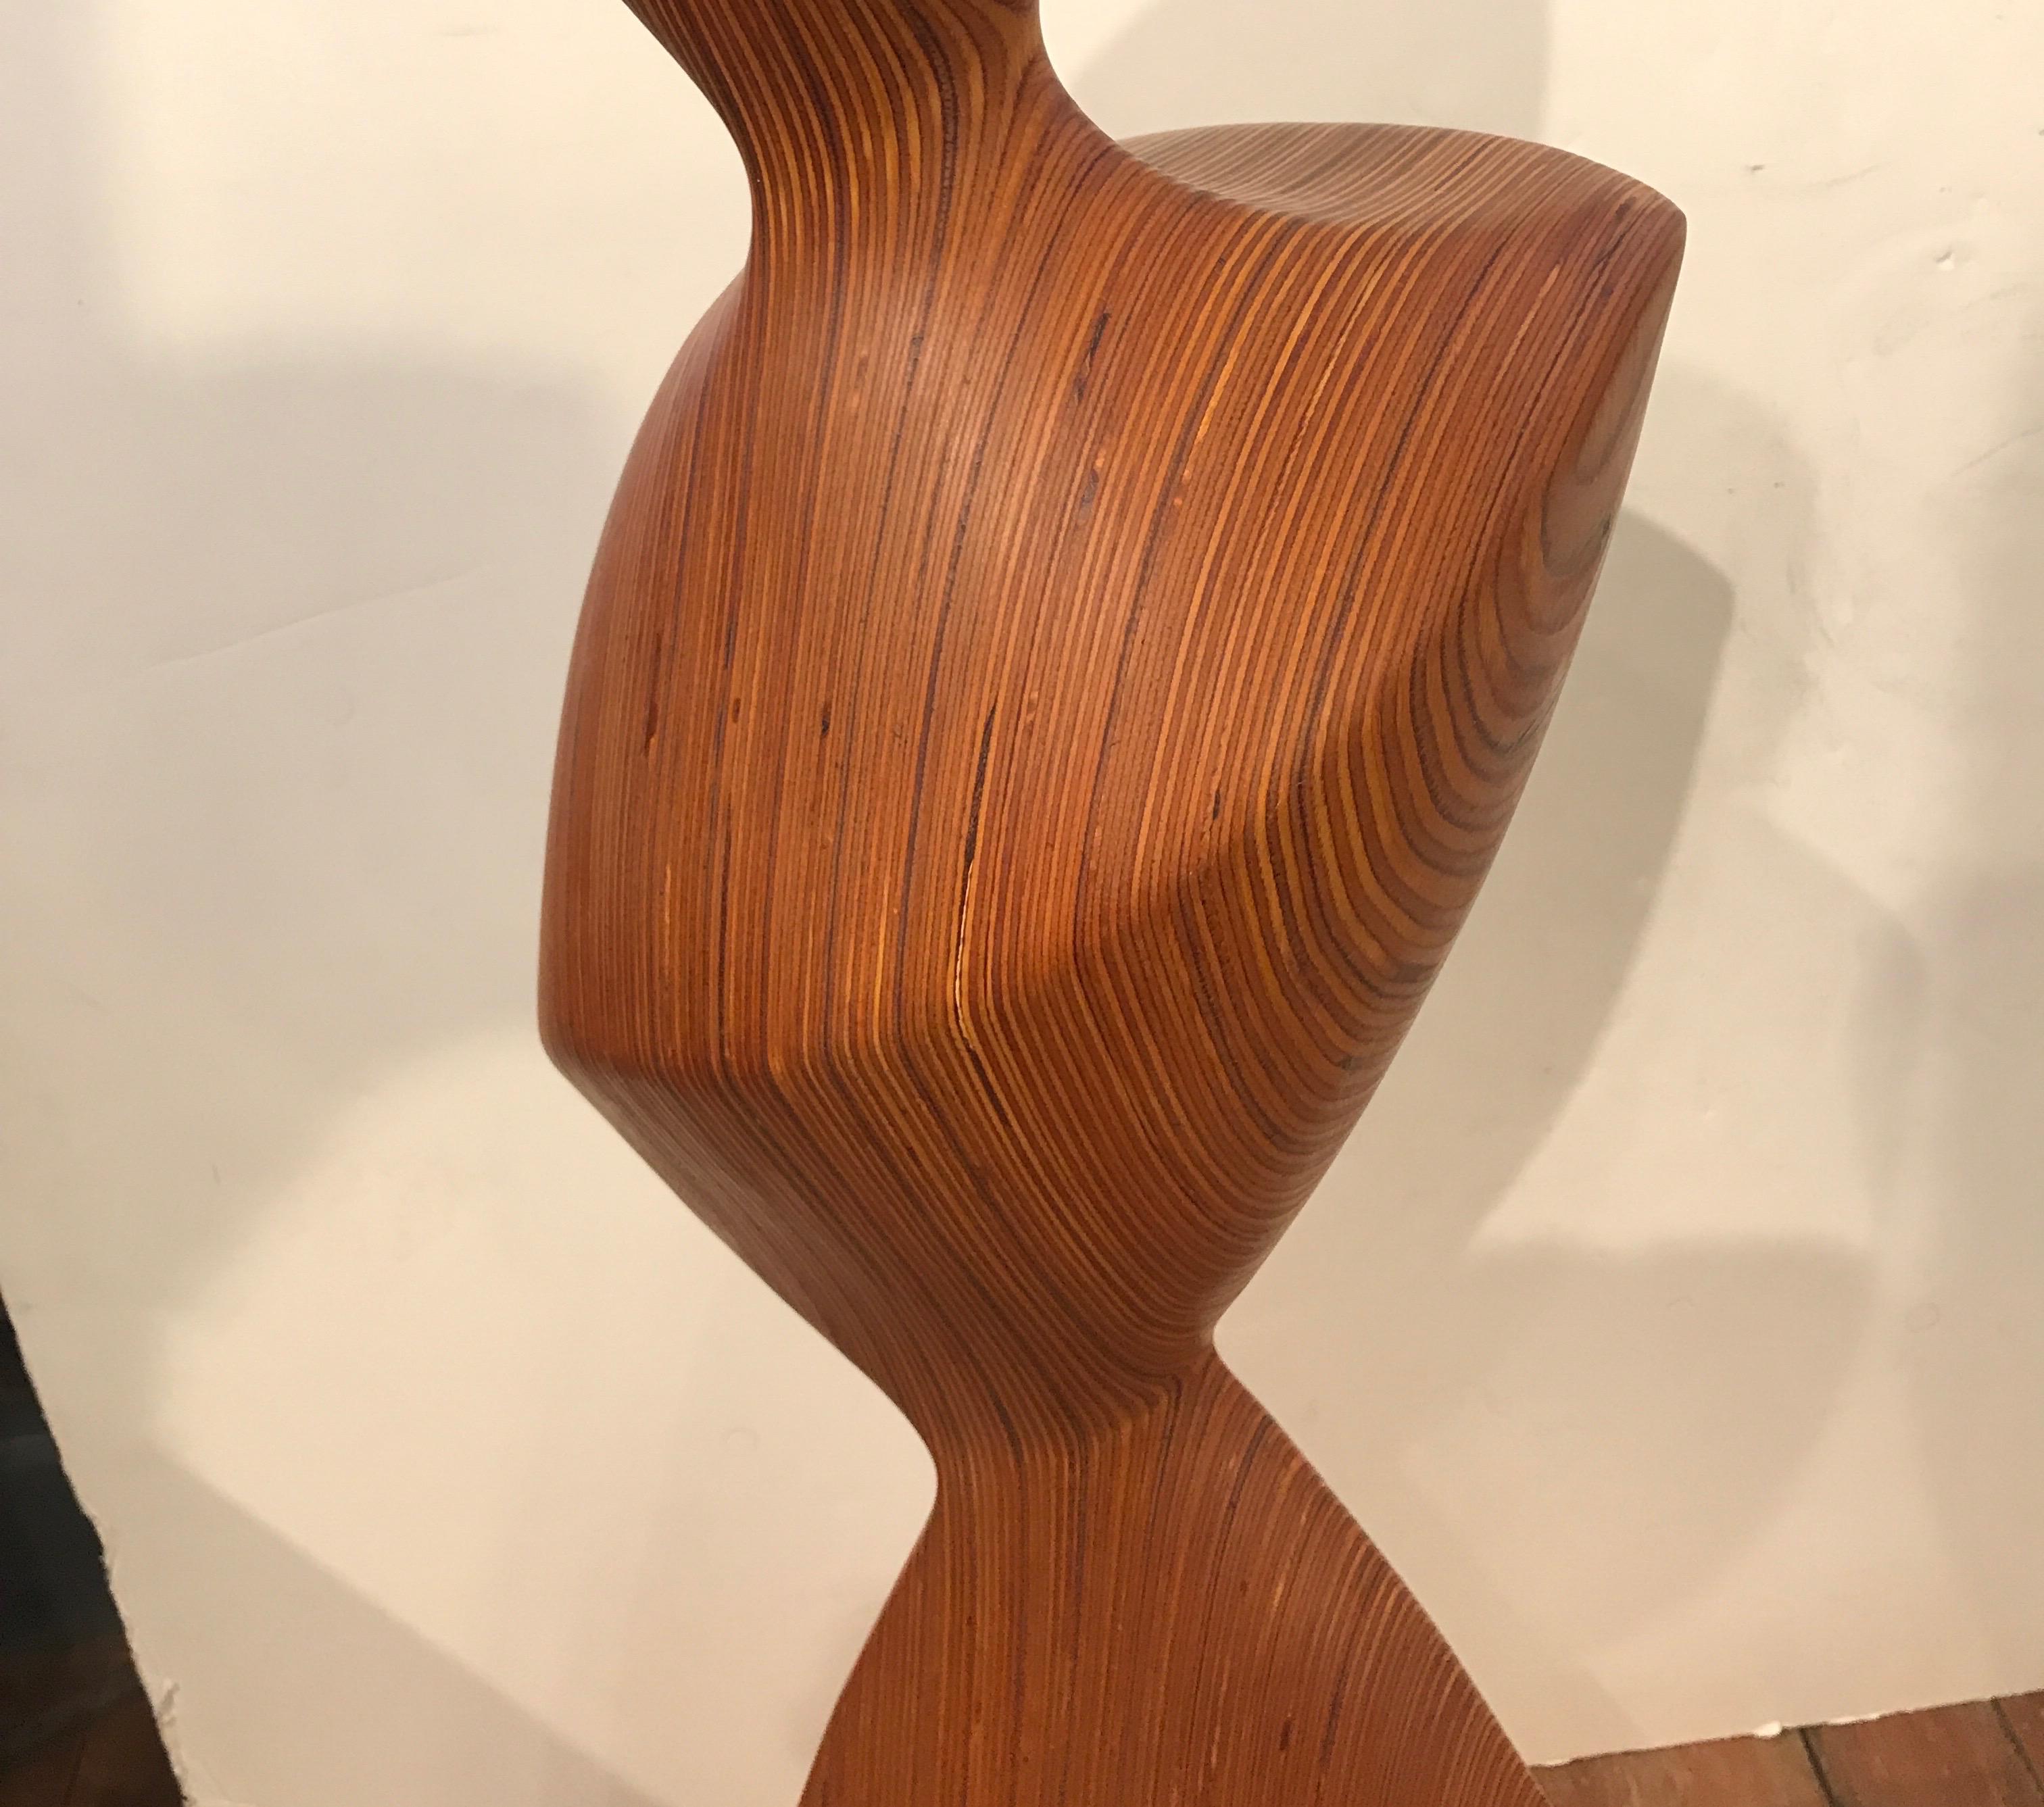 Mid-Century Modern Wood Laminated Abstract Sculpture of a Woman, 1960s